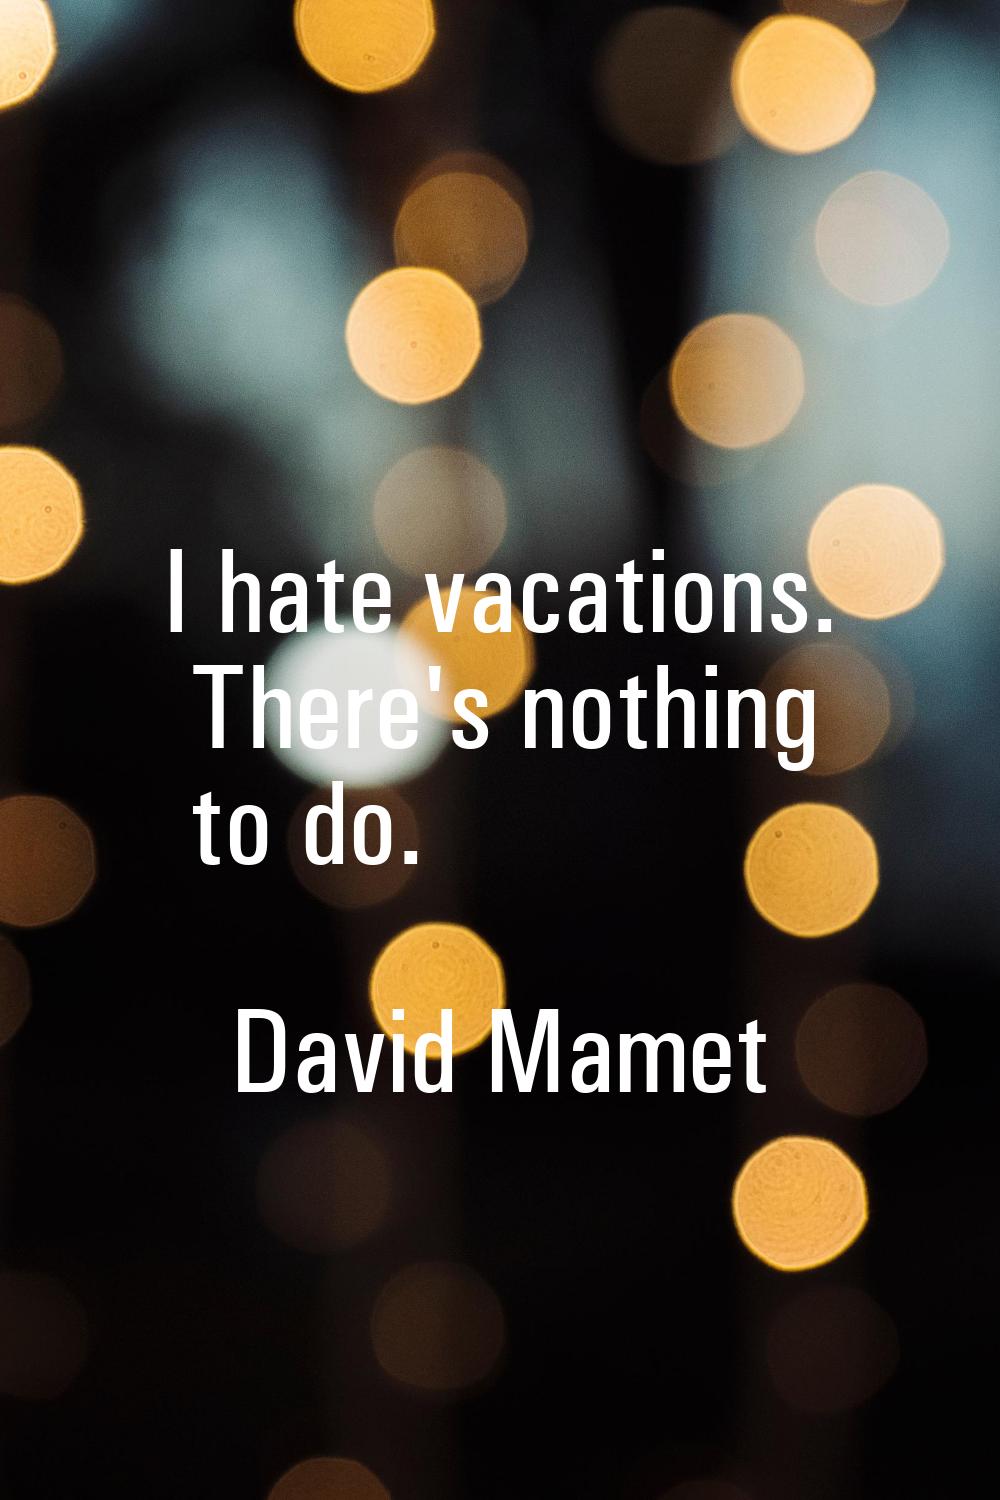 I hate vacations. There's nothing to do.